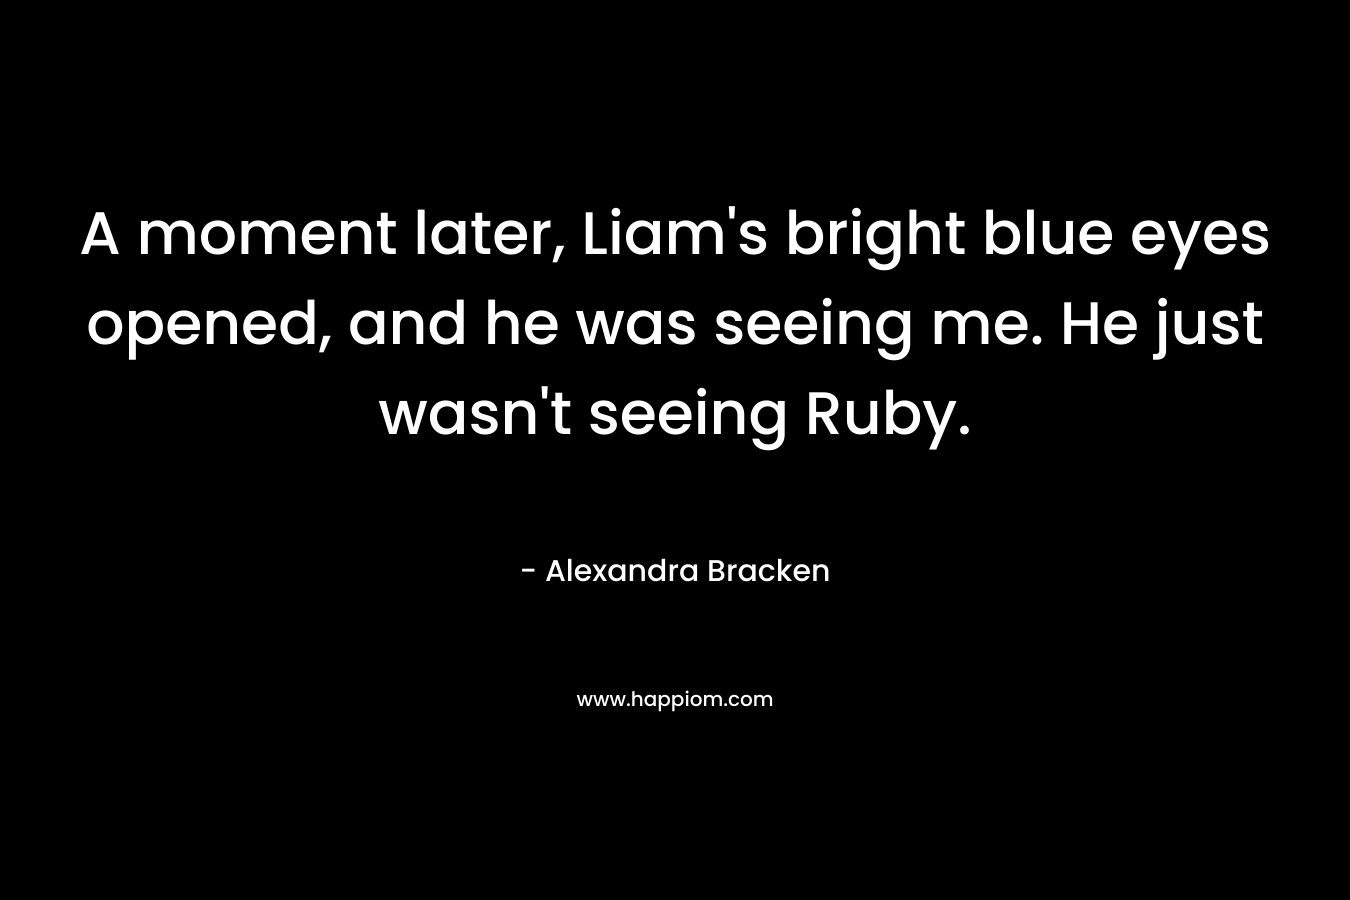 A moment later, Liam's bright blue eyes opened, and he was seeing me. He just wasn't seeing Ruby.